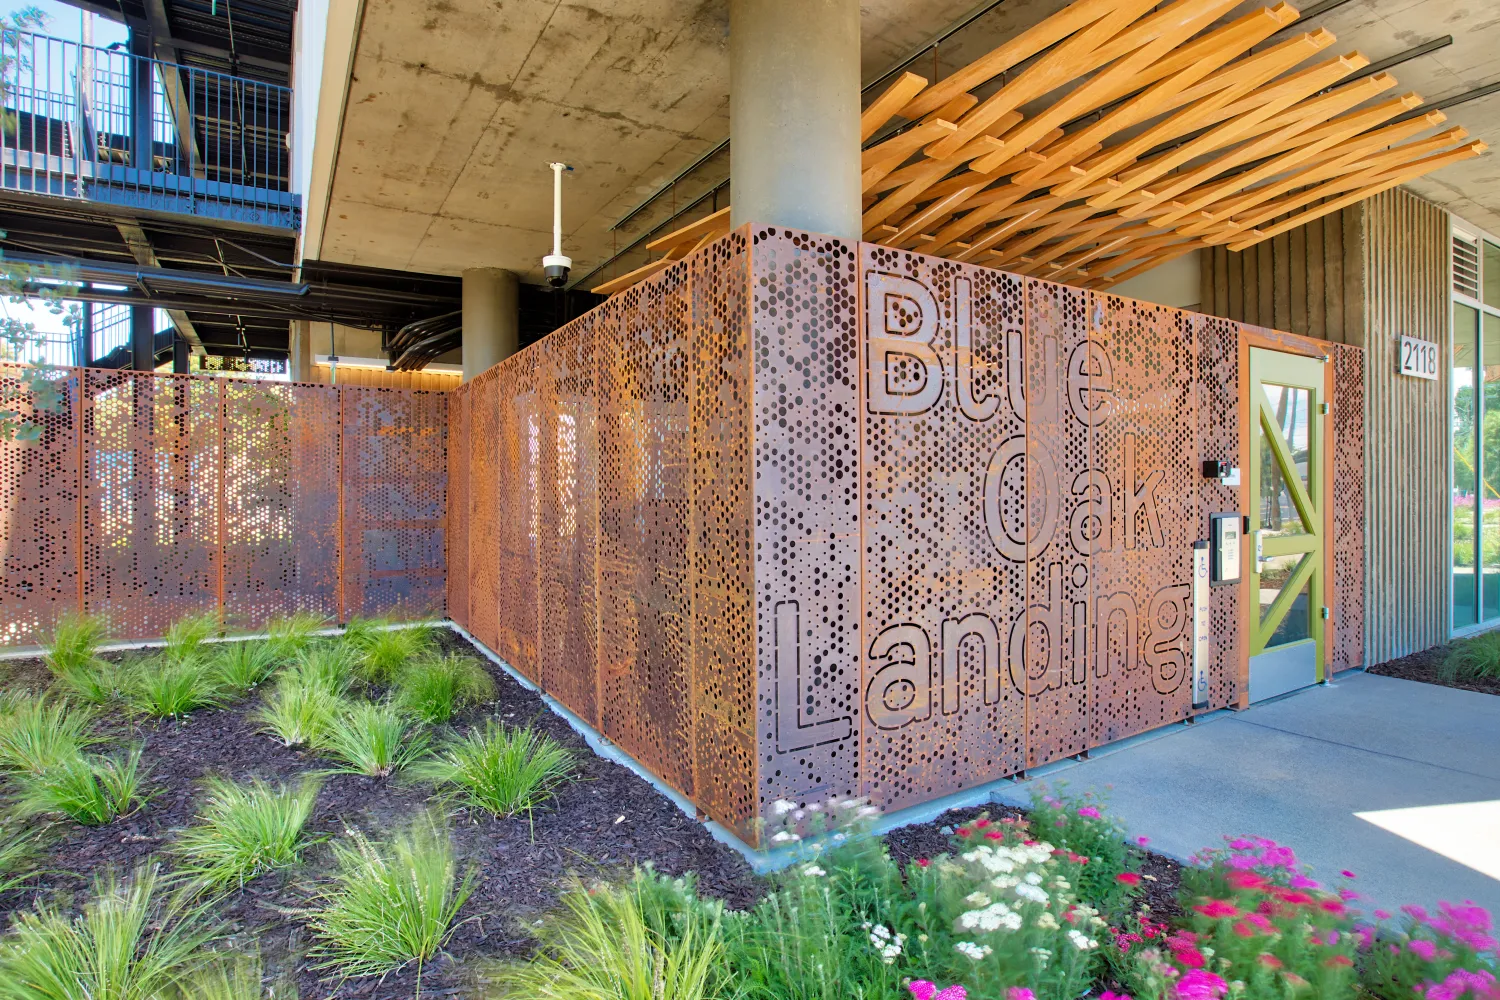 Detail view of greenery in front of the cor-ten steel entry fence at Blue Oak Landing in Vallejo, California.